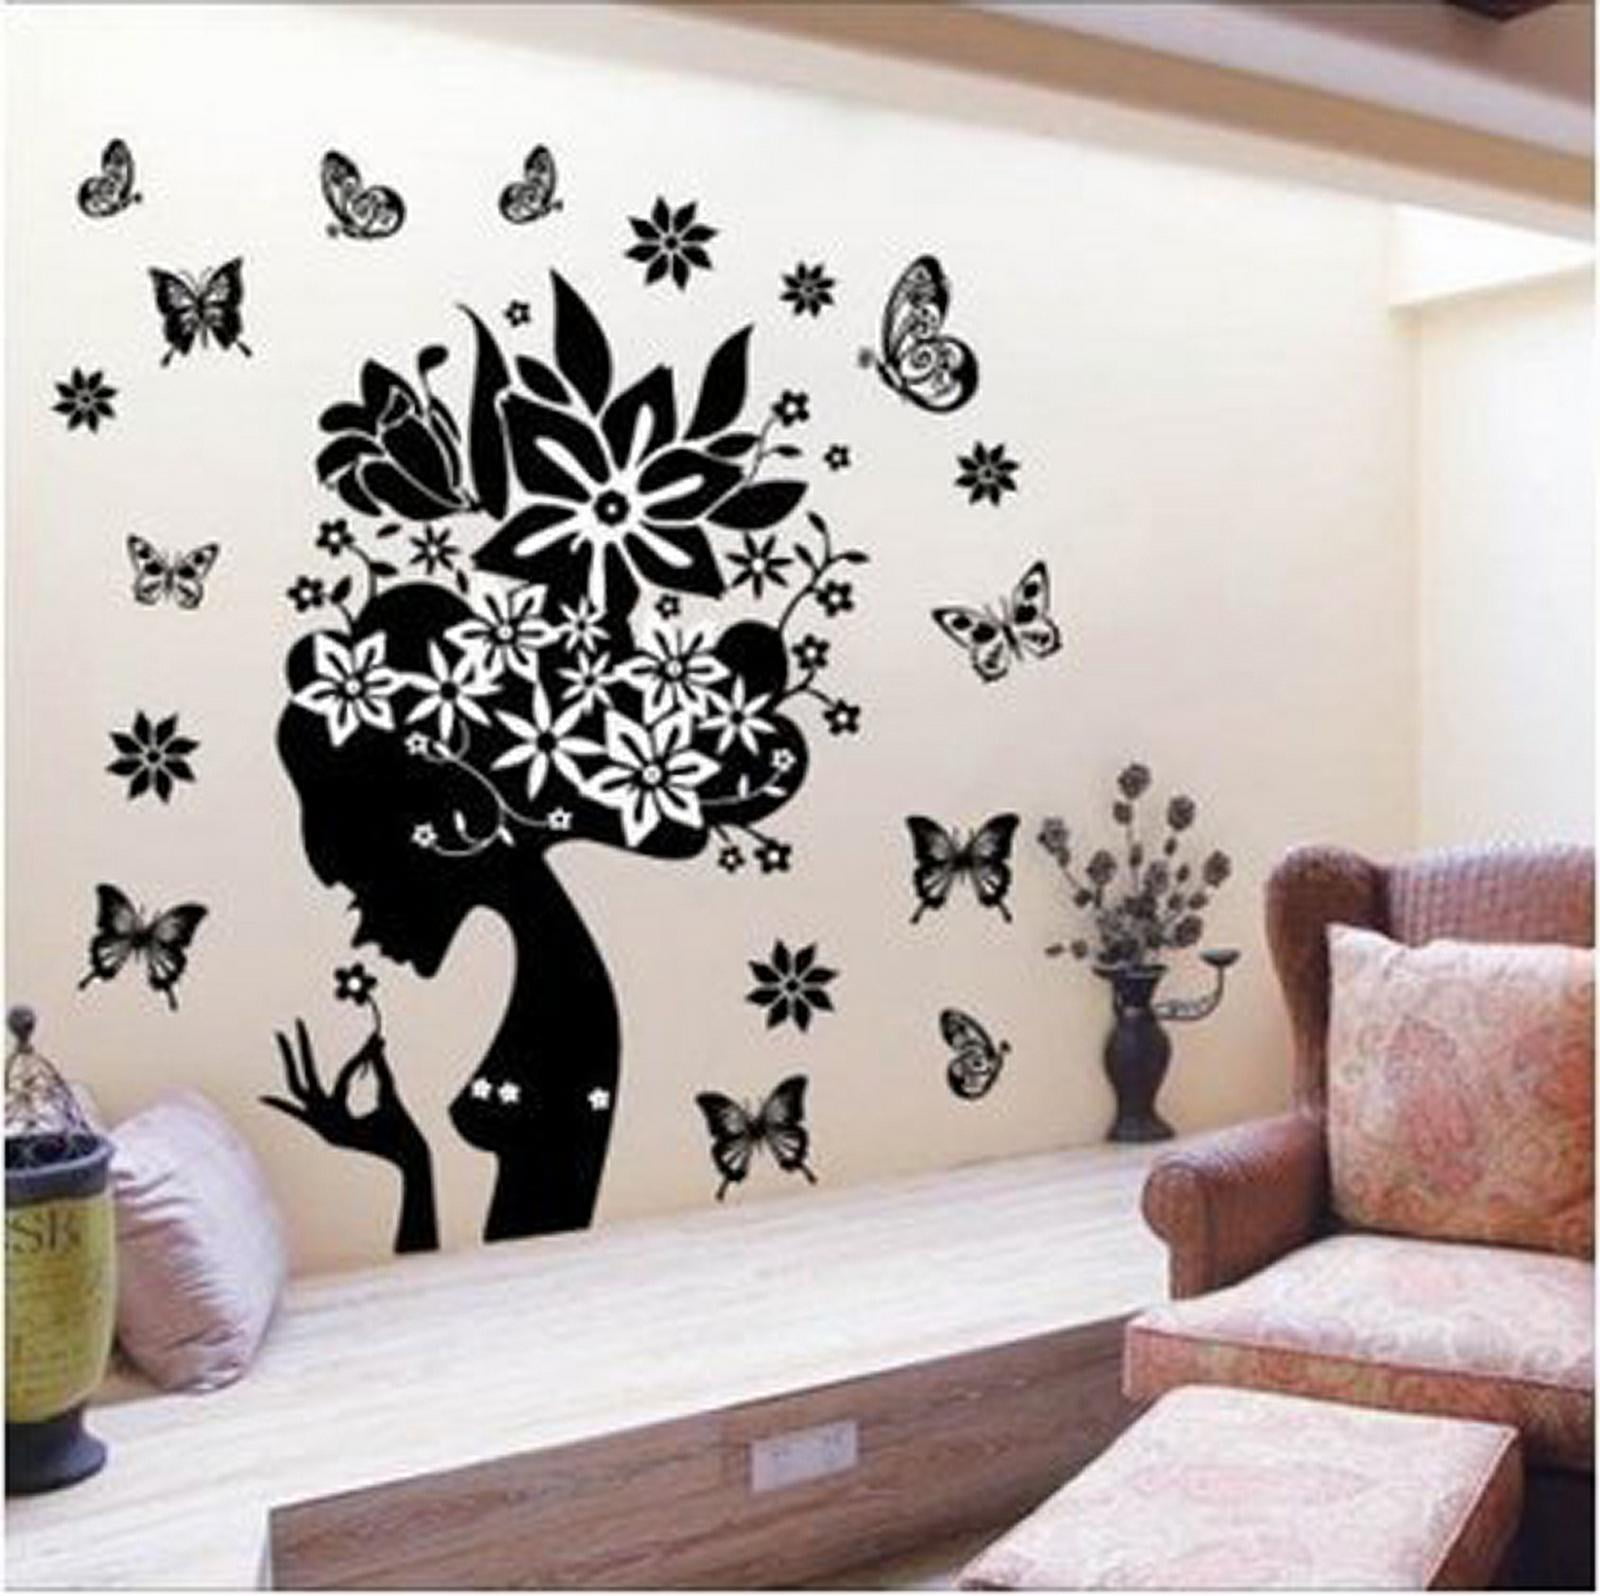 Dandelion Fairy Girl Glow In The Dark Wall Stickers Luminous Removable Decal 